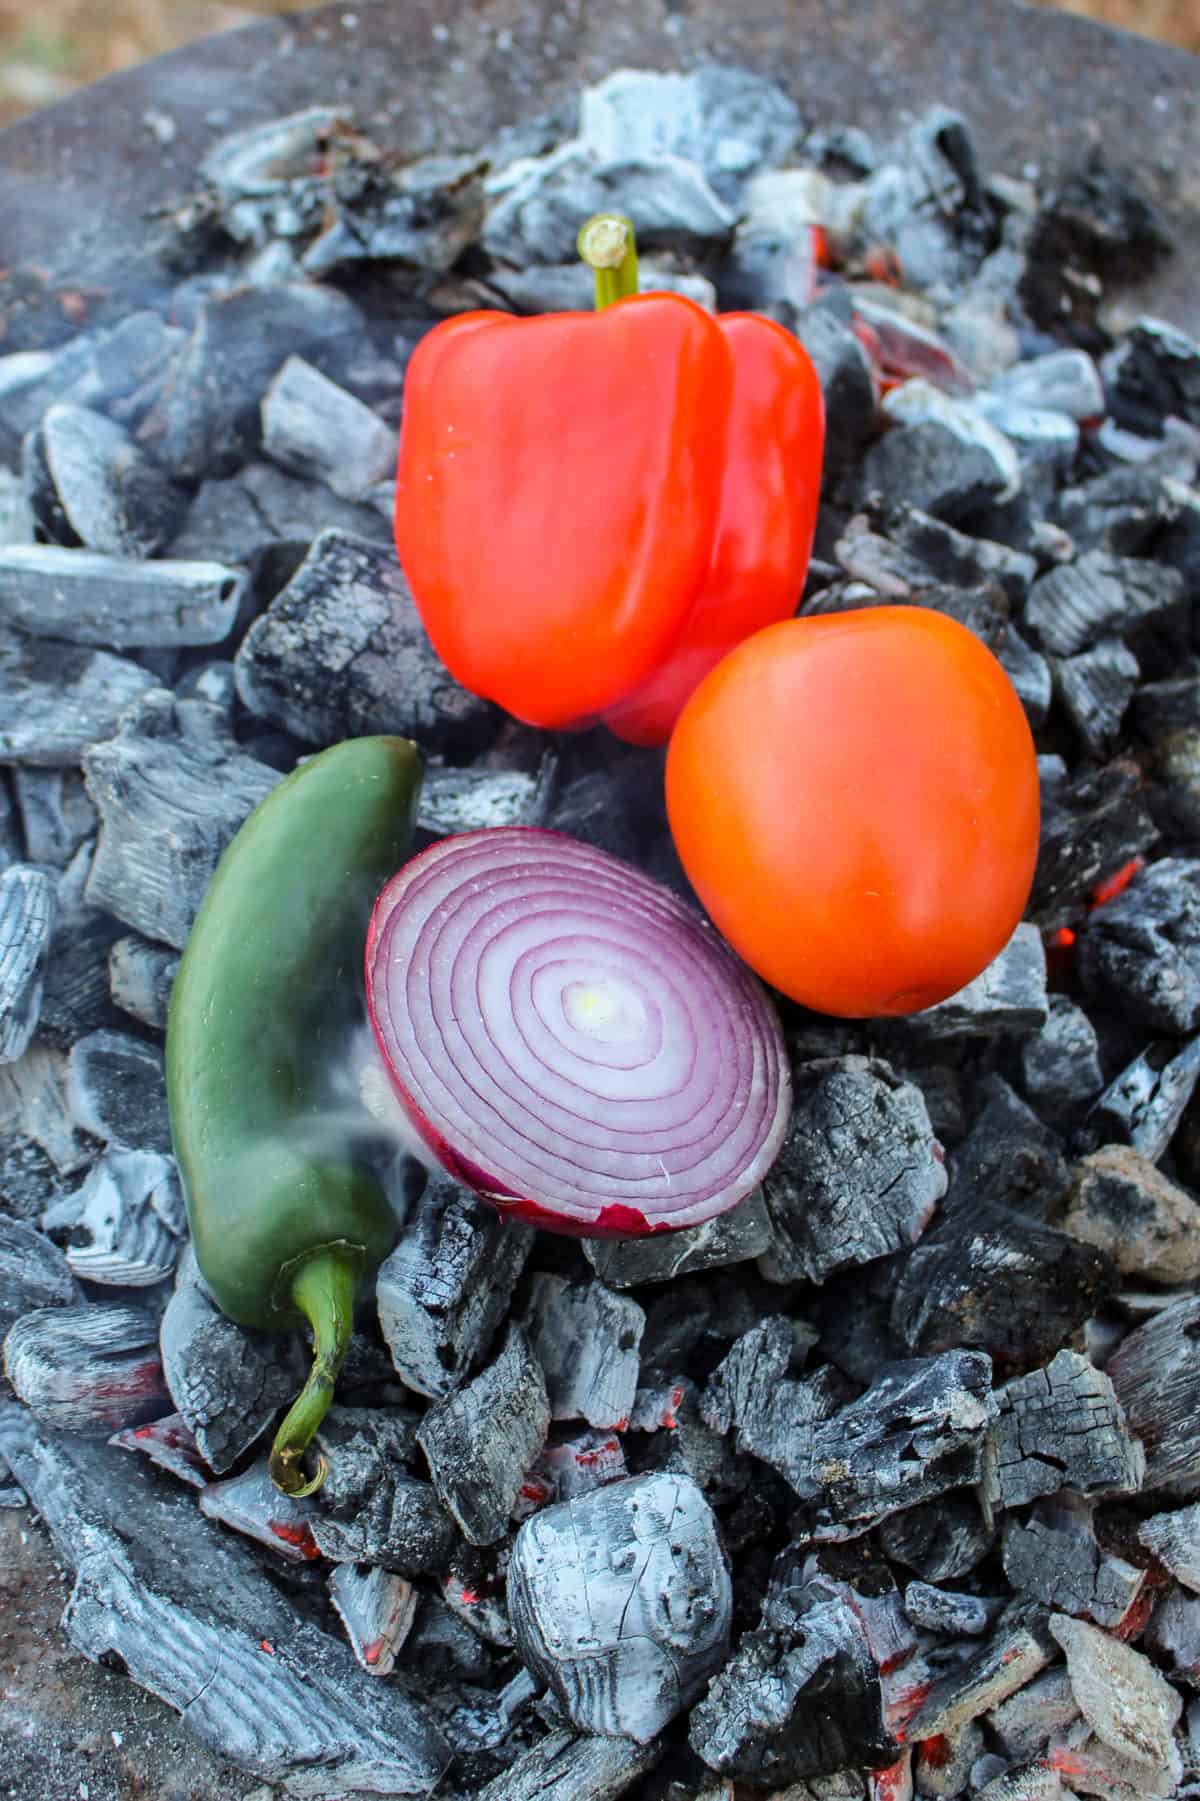 Roasting our veggies on the coals to make the perfect Loaded Steak Fries salsa.